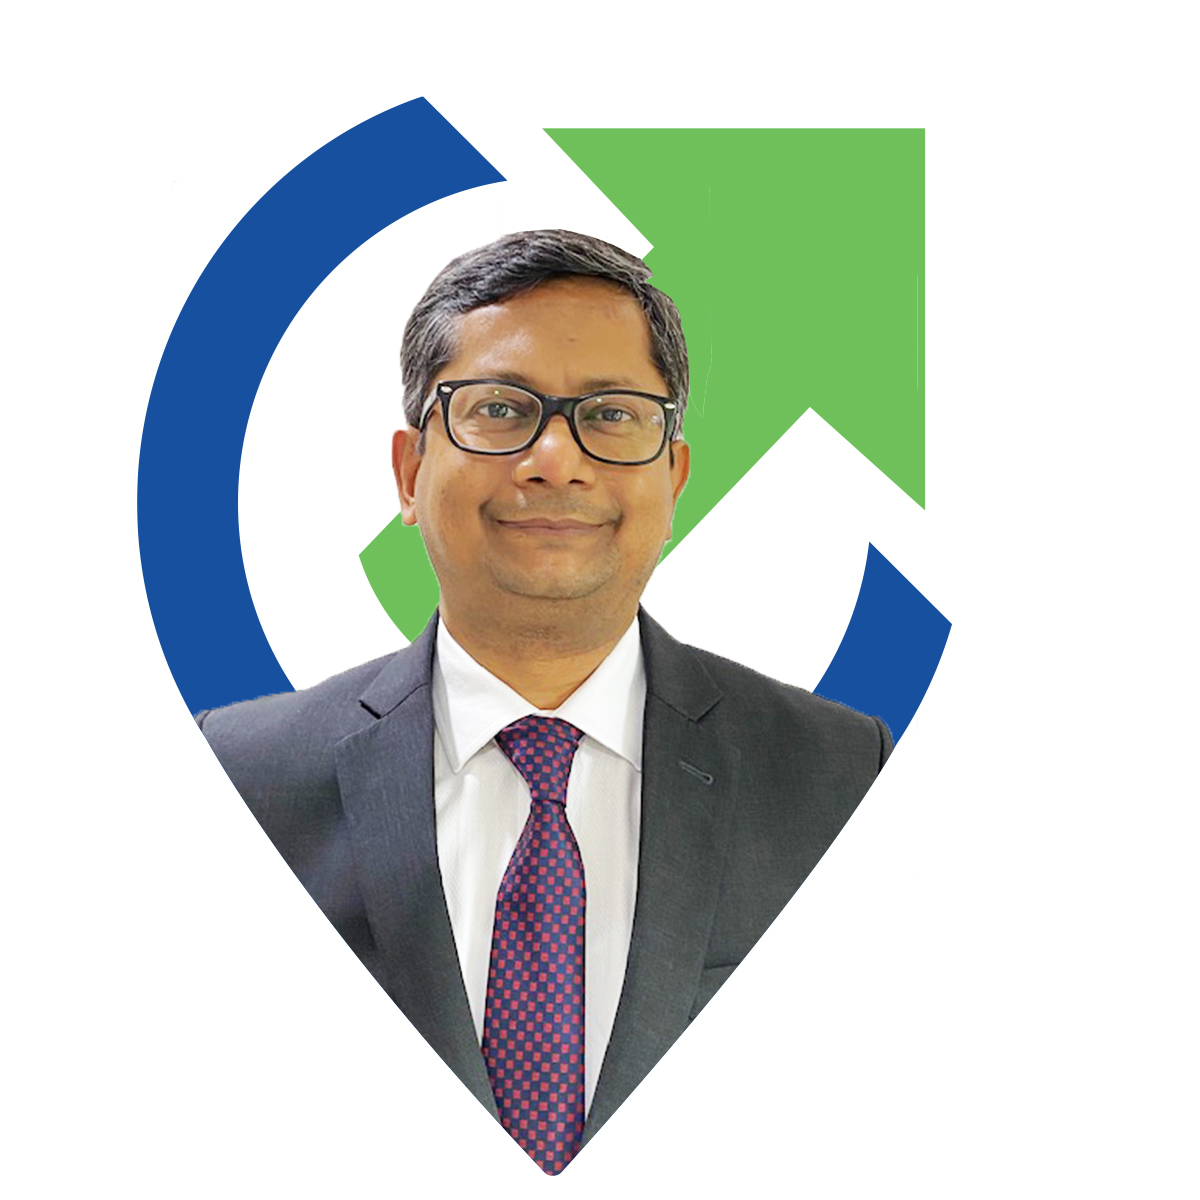 PayNearby strengthens its leadership team with the appointment of Vikas Jalan as Chief Financial Officer